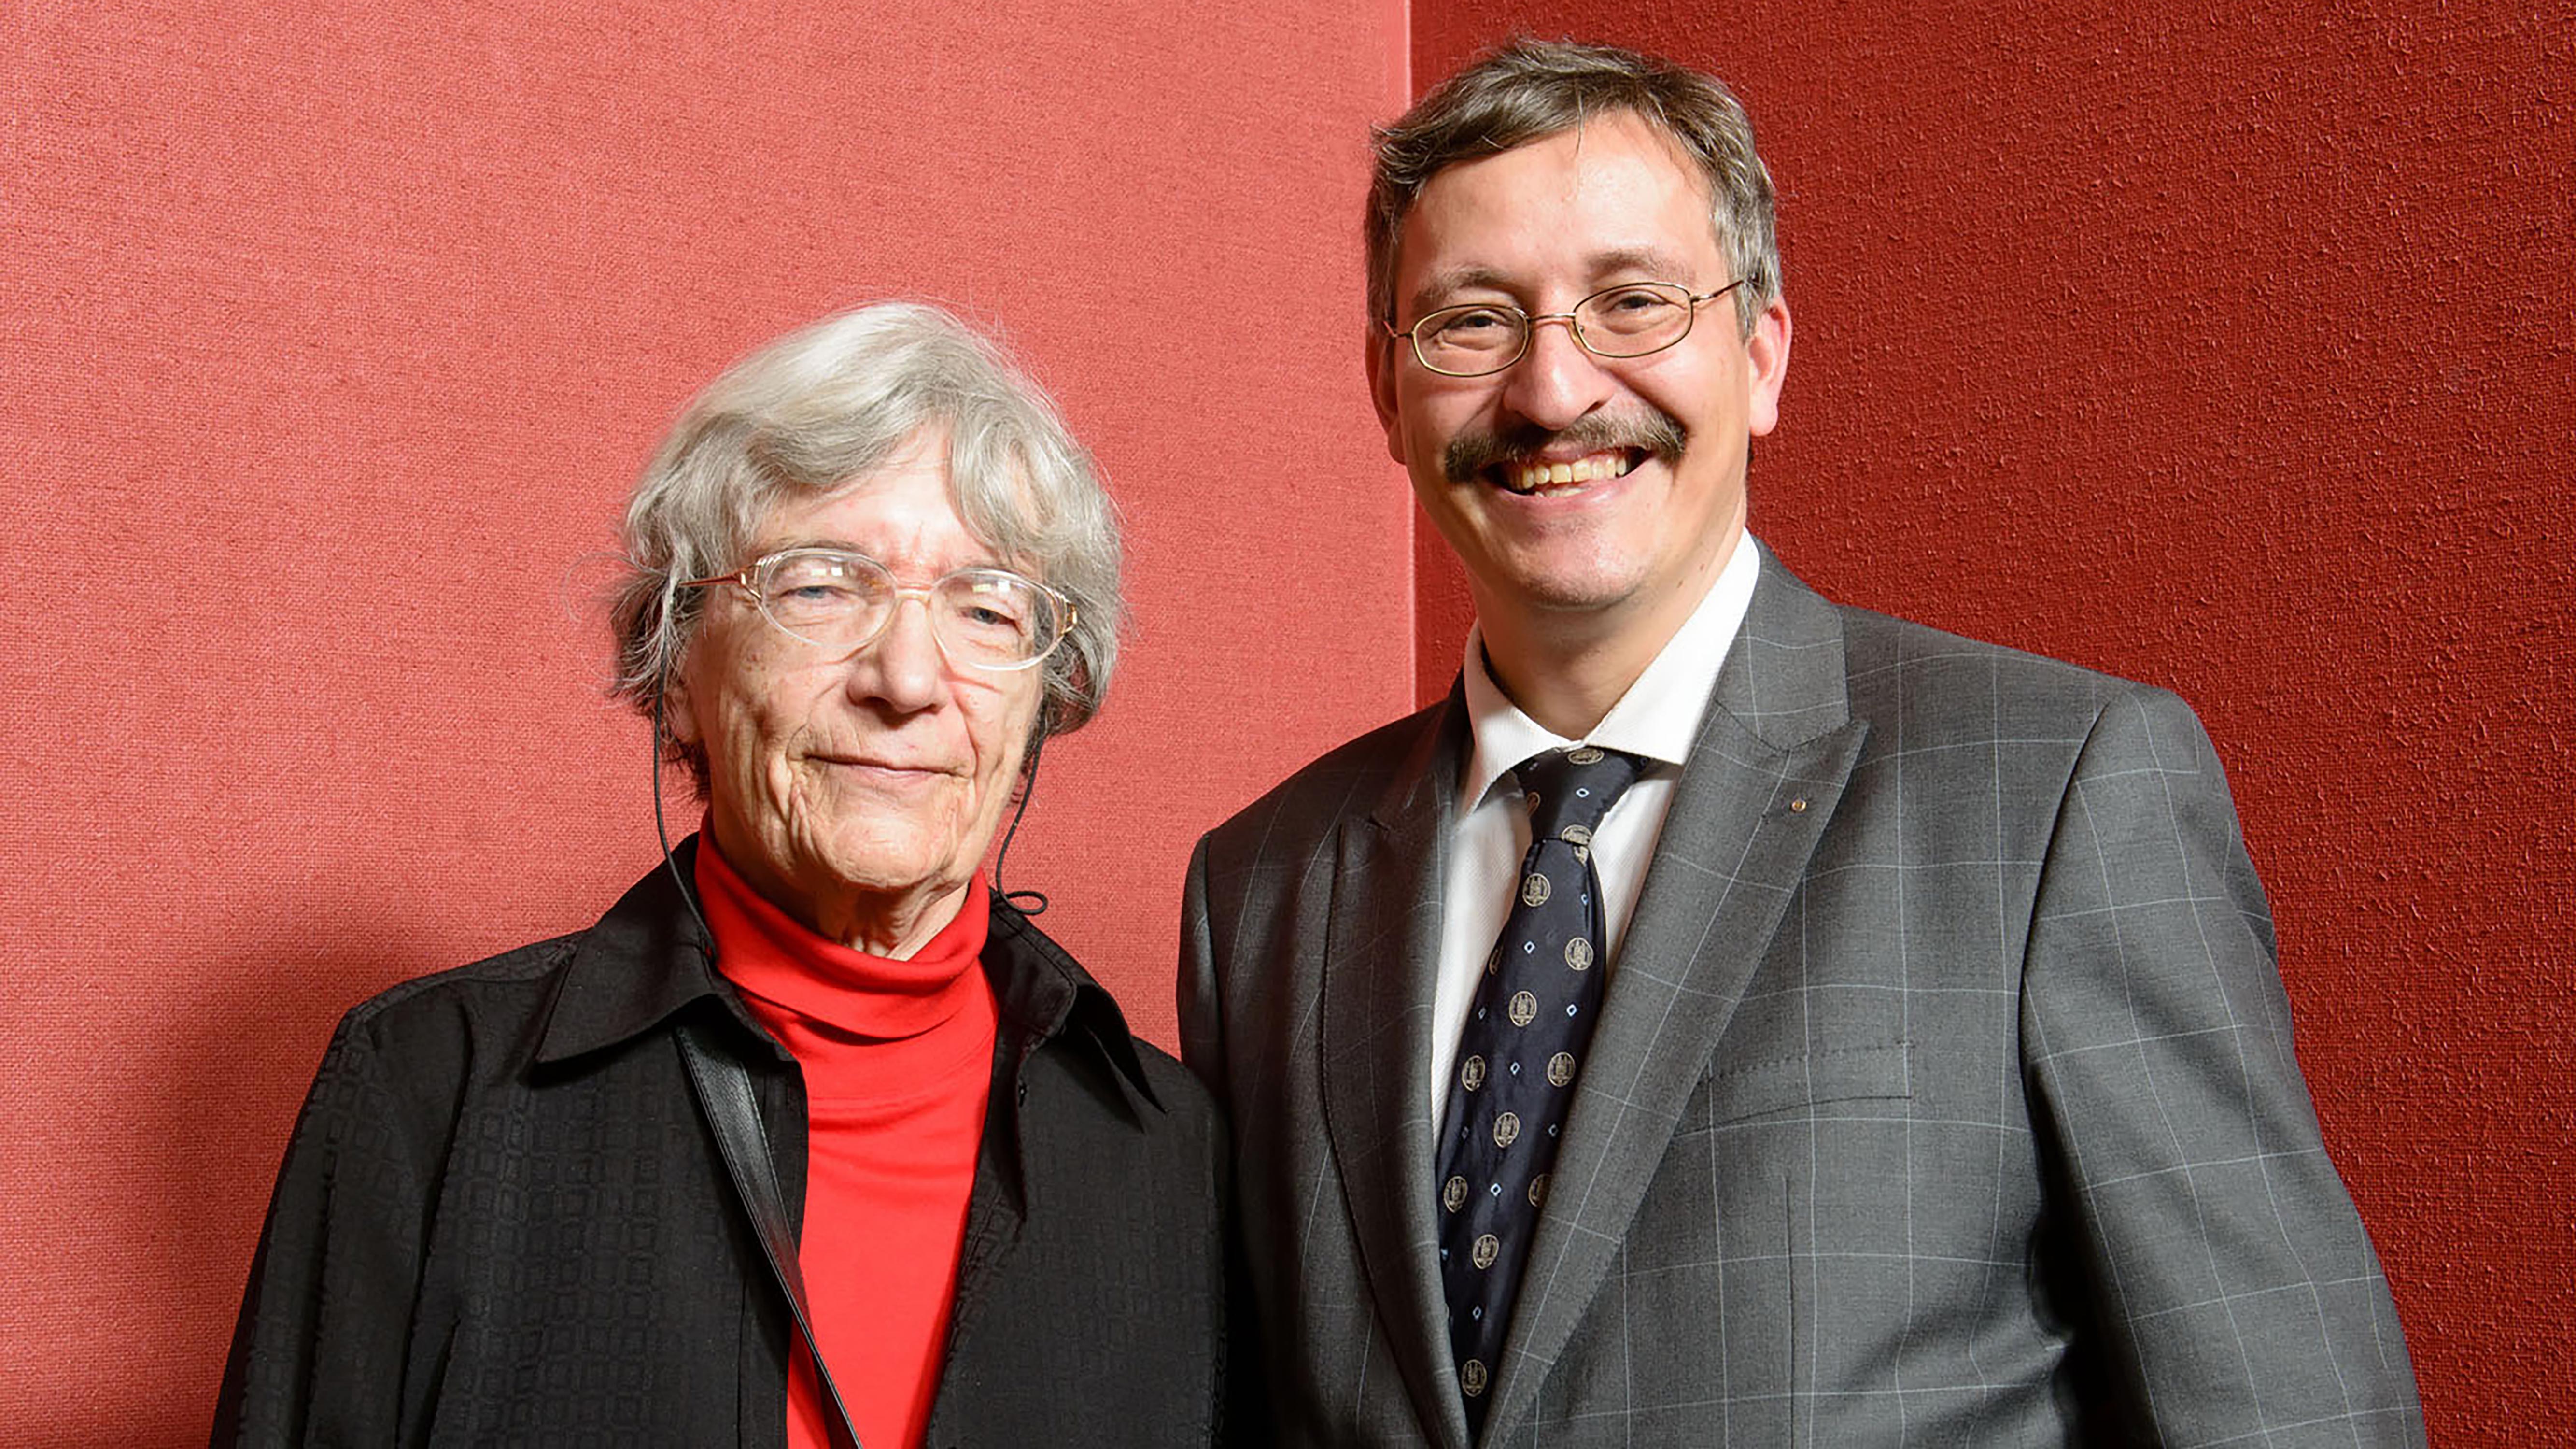 <p>A pioneering predecessor: Physicist Verena Meyer (dec. 2018) was President of UZH from 1982 to 1984. After her, no presidents came from the natural sciences for 30 years &ndash; until Michael Hengartner took office. The picture was taken in February 2014 at a reception for female professors in the Uniturm restaurant.</p> (Image: Frank Brüderli)